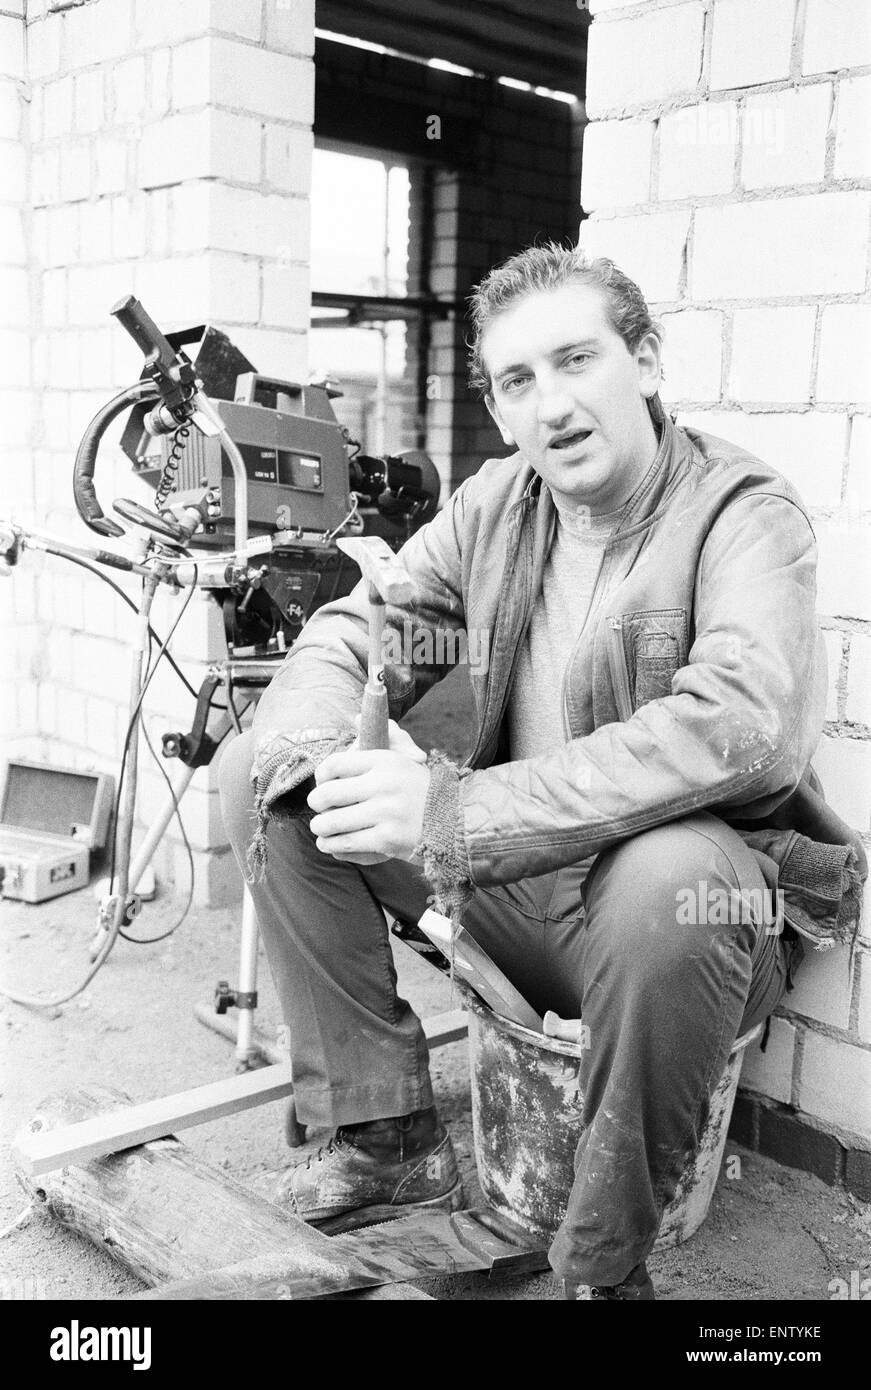 Gary Holton Actor Auf Wiedersehen Pet, television programme, being filmed at Central TV's Elstree Studios, October 1982. The comedy series is about a team of British bricklayers working in Germany. Pictured: actor Jimmy Nail Stock Photo